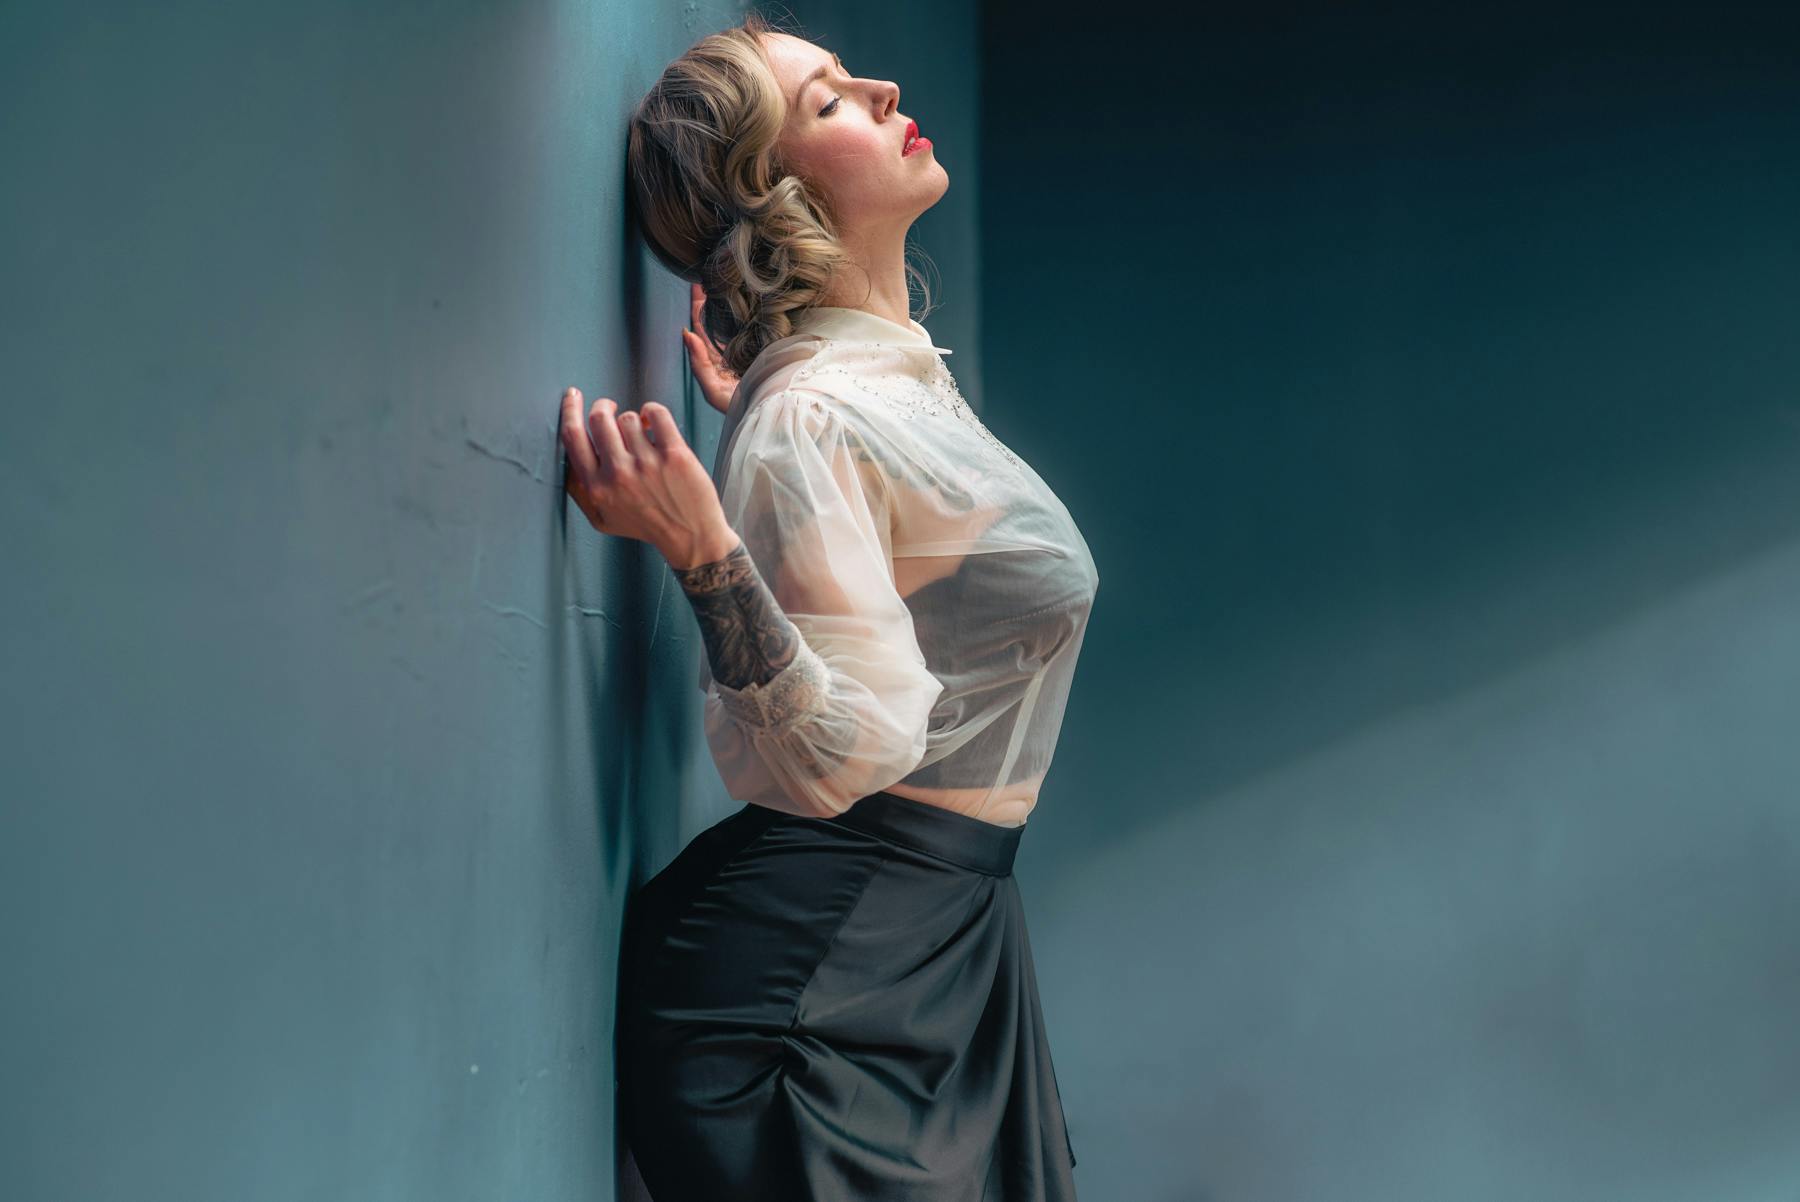 a portrait of Amelie wearing a white sheer blouse with a black bra beneath and a black skirt. she is leaning against a wall and is in profile.